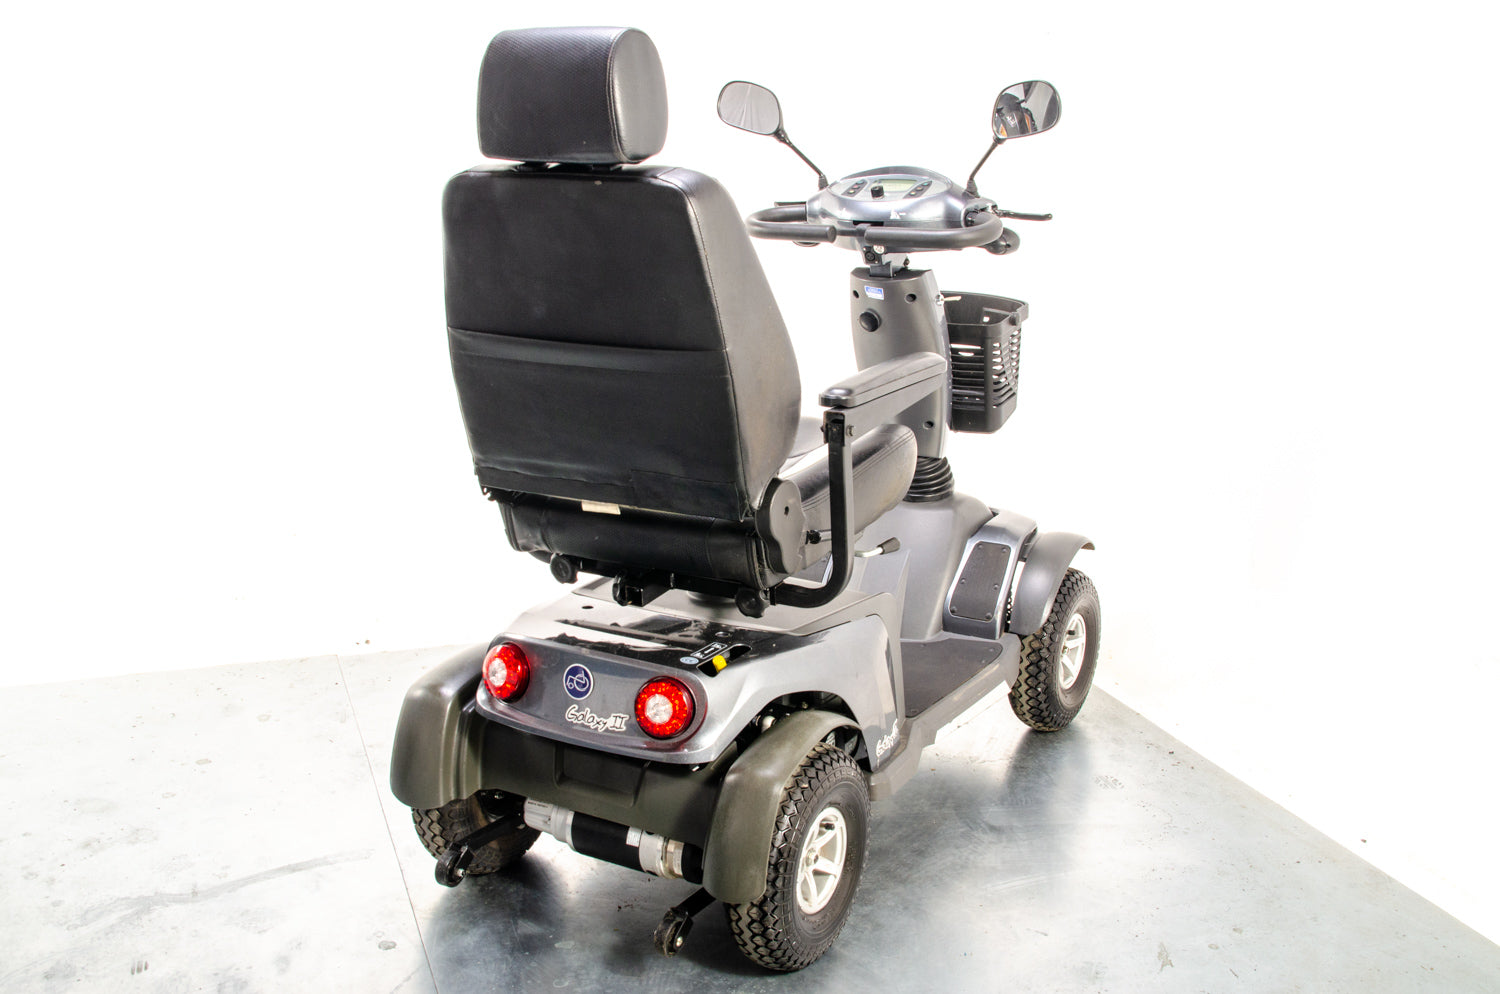 Galaxy II All-Terrain Off-Road Used Mobility Scooter 8mph Van Os Large Comfy Class 3 Road Legal 03546